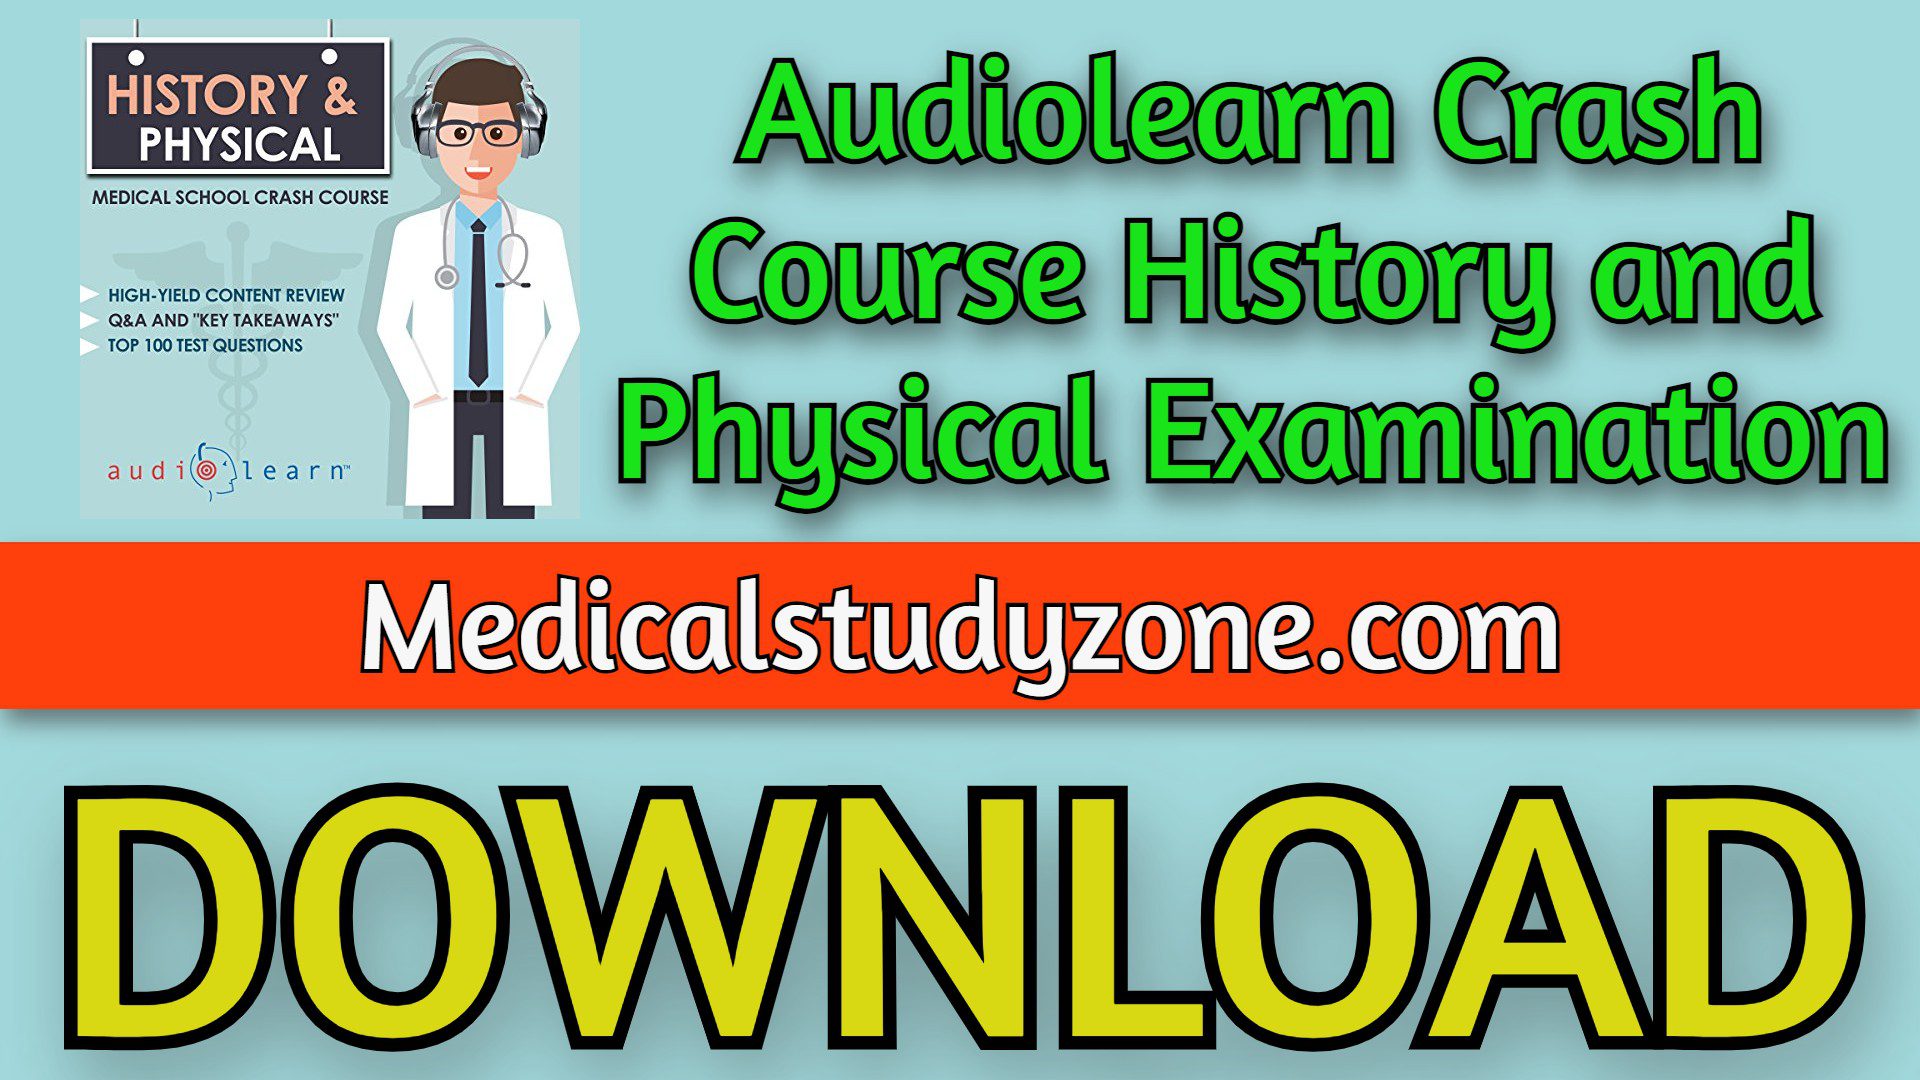 Audiolearn Crash Course History and Physical Examination 2023 Free Download